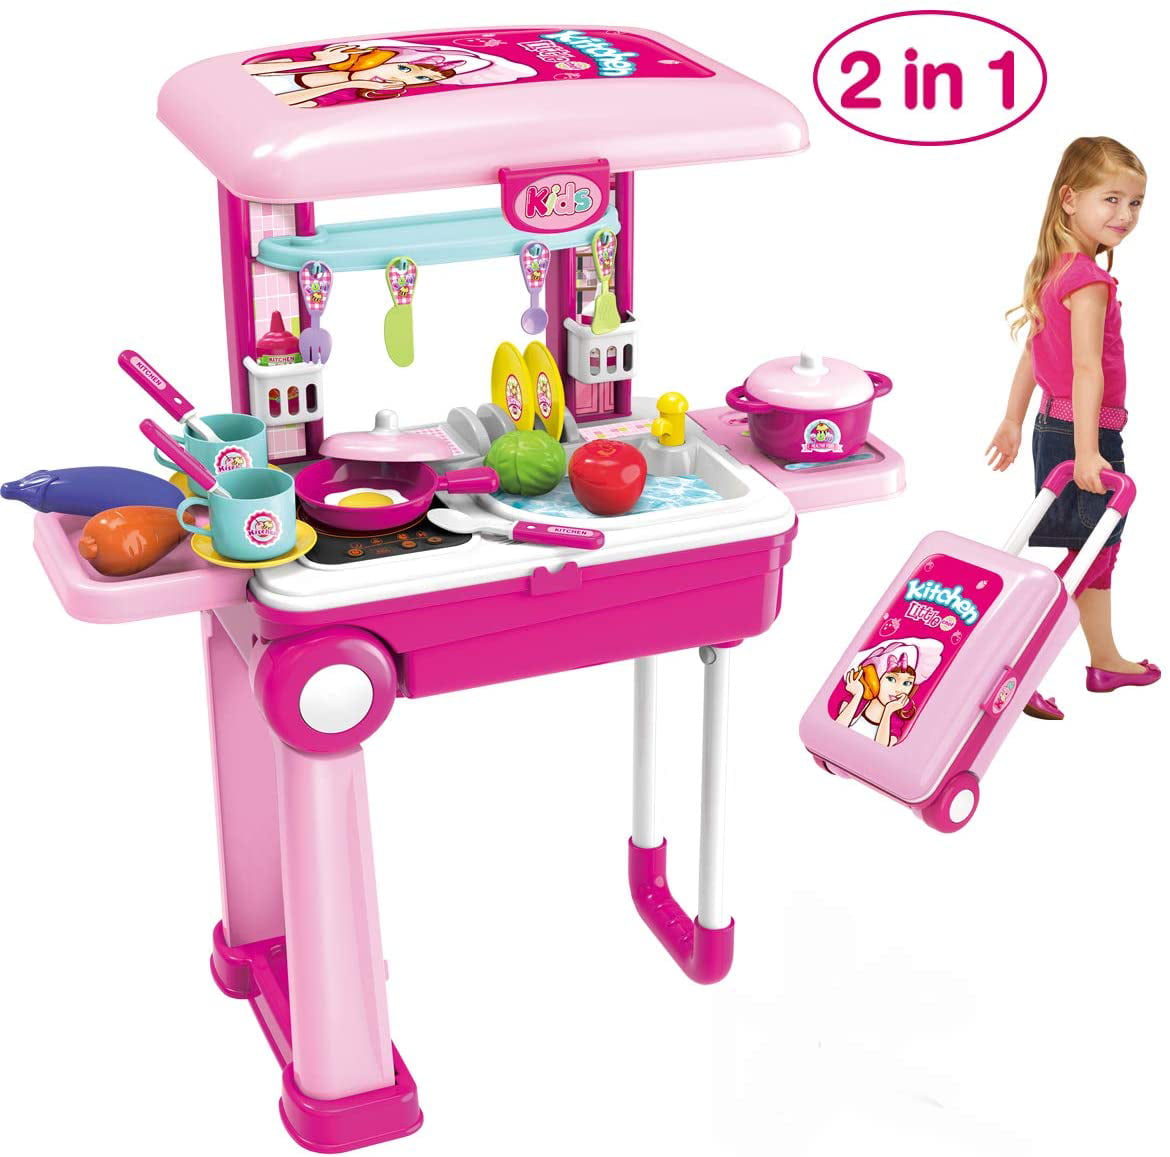 3-5 Years Lights and Accessories Included deAO SC-KP 2-in-1 Portable ‘My Little Chef’ Kitchen Suitcase Play Set with Sound Pink 